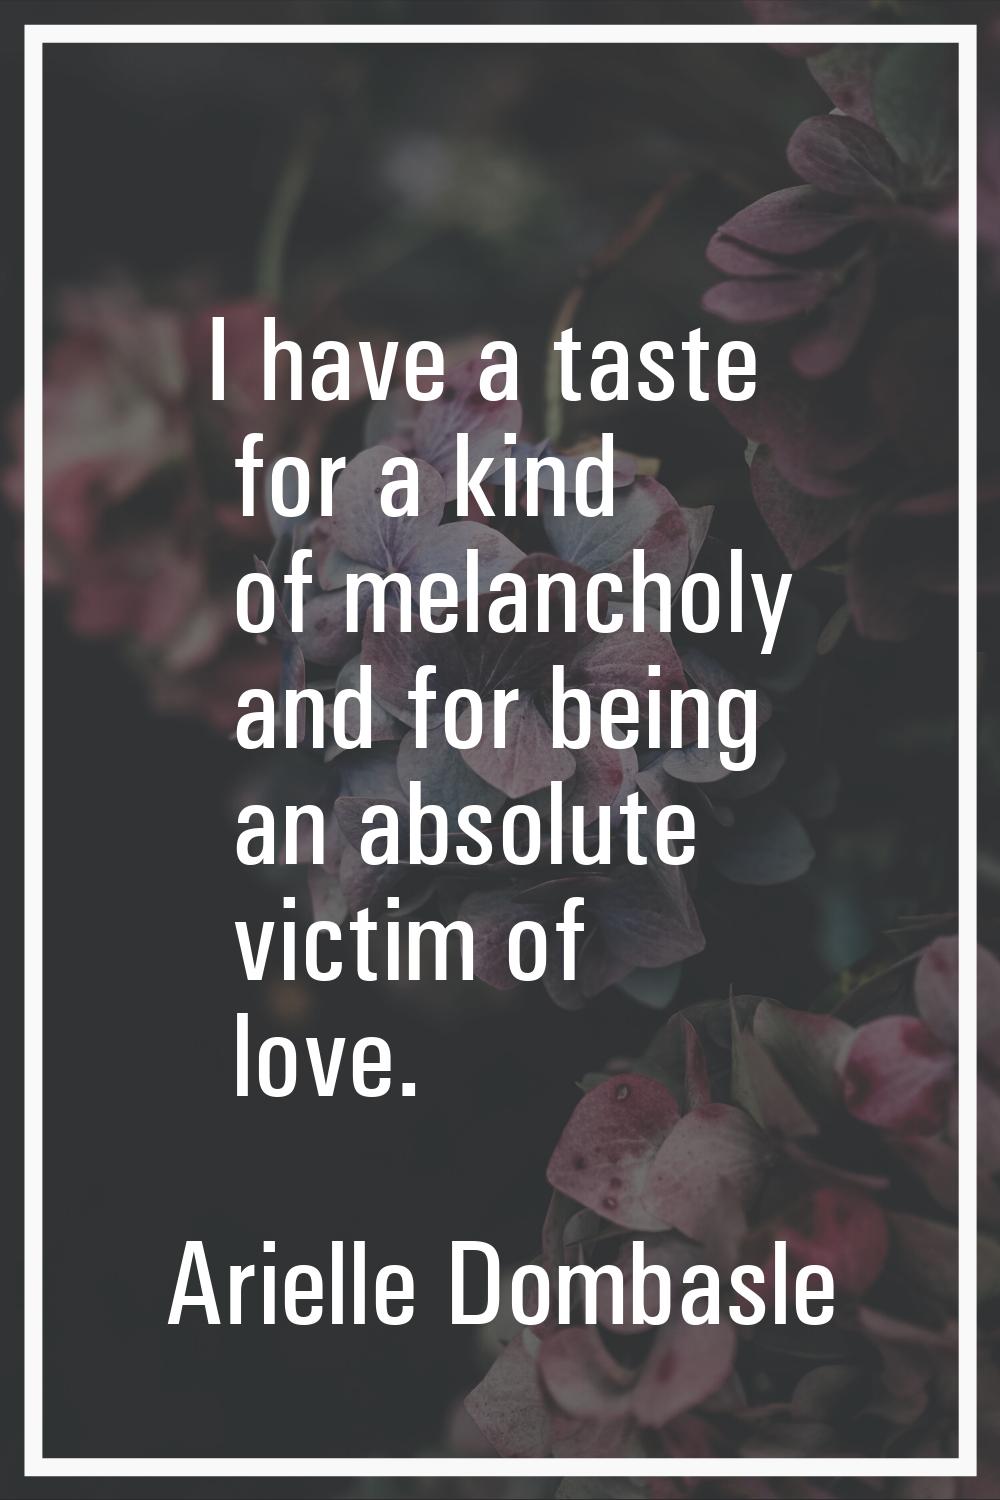 I have a taste for a kind of melancholy and for being an absolute victim of love.